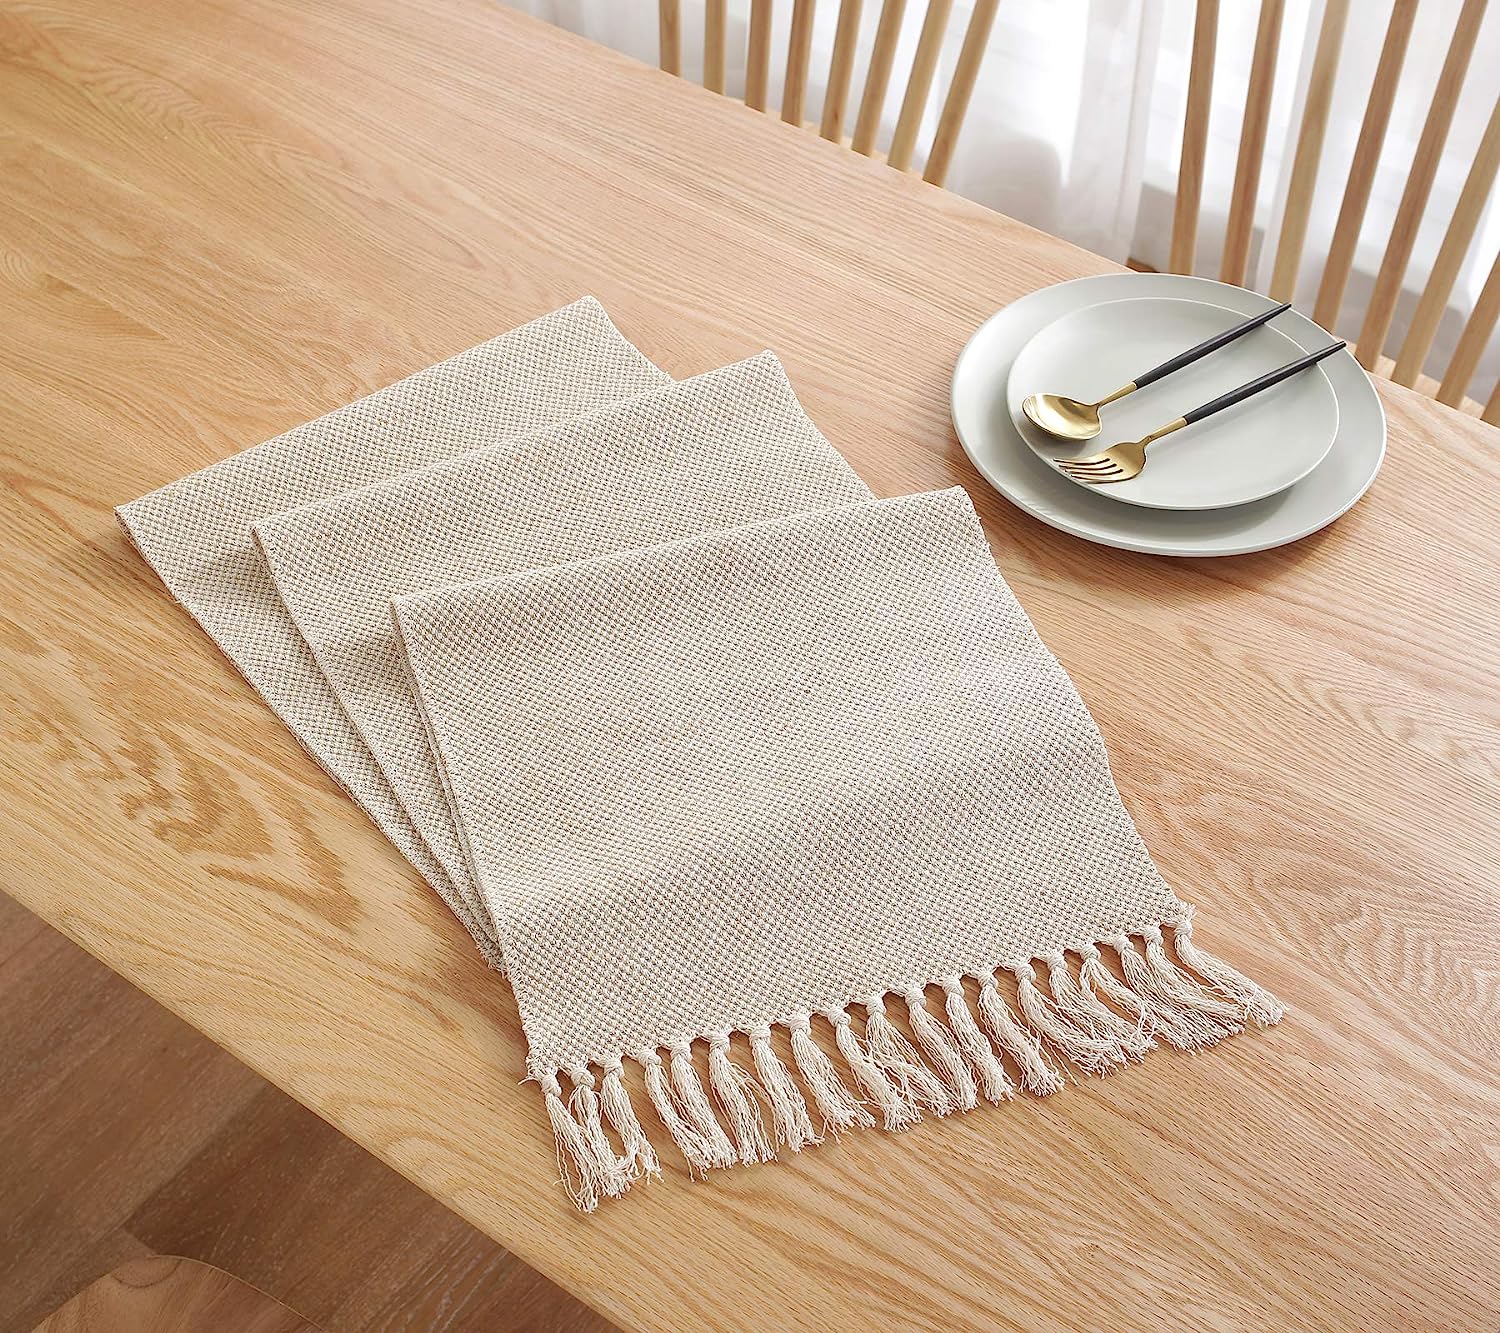 Wracra Cotton Hessian Table Runner Braided Farmhouse Style Jute Table Runner 180cm Long for Holiday Parties and Everyday Use(Waffle, 180cm) 6